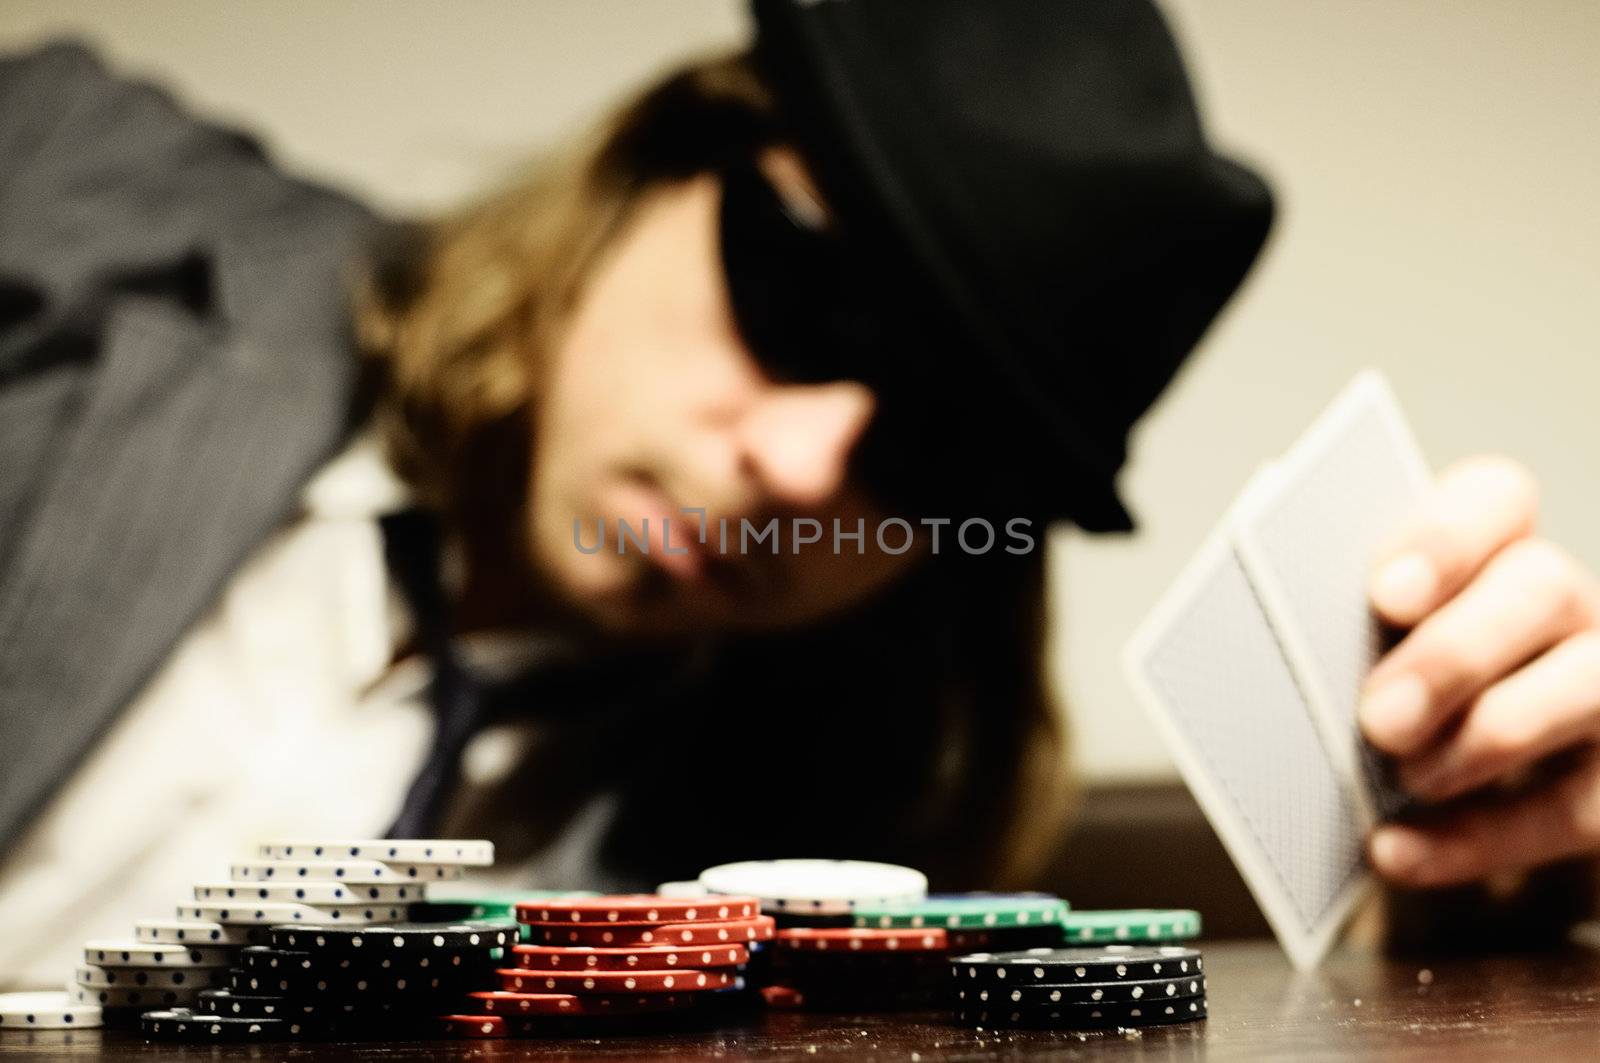 Pokerface by fahrner